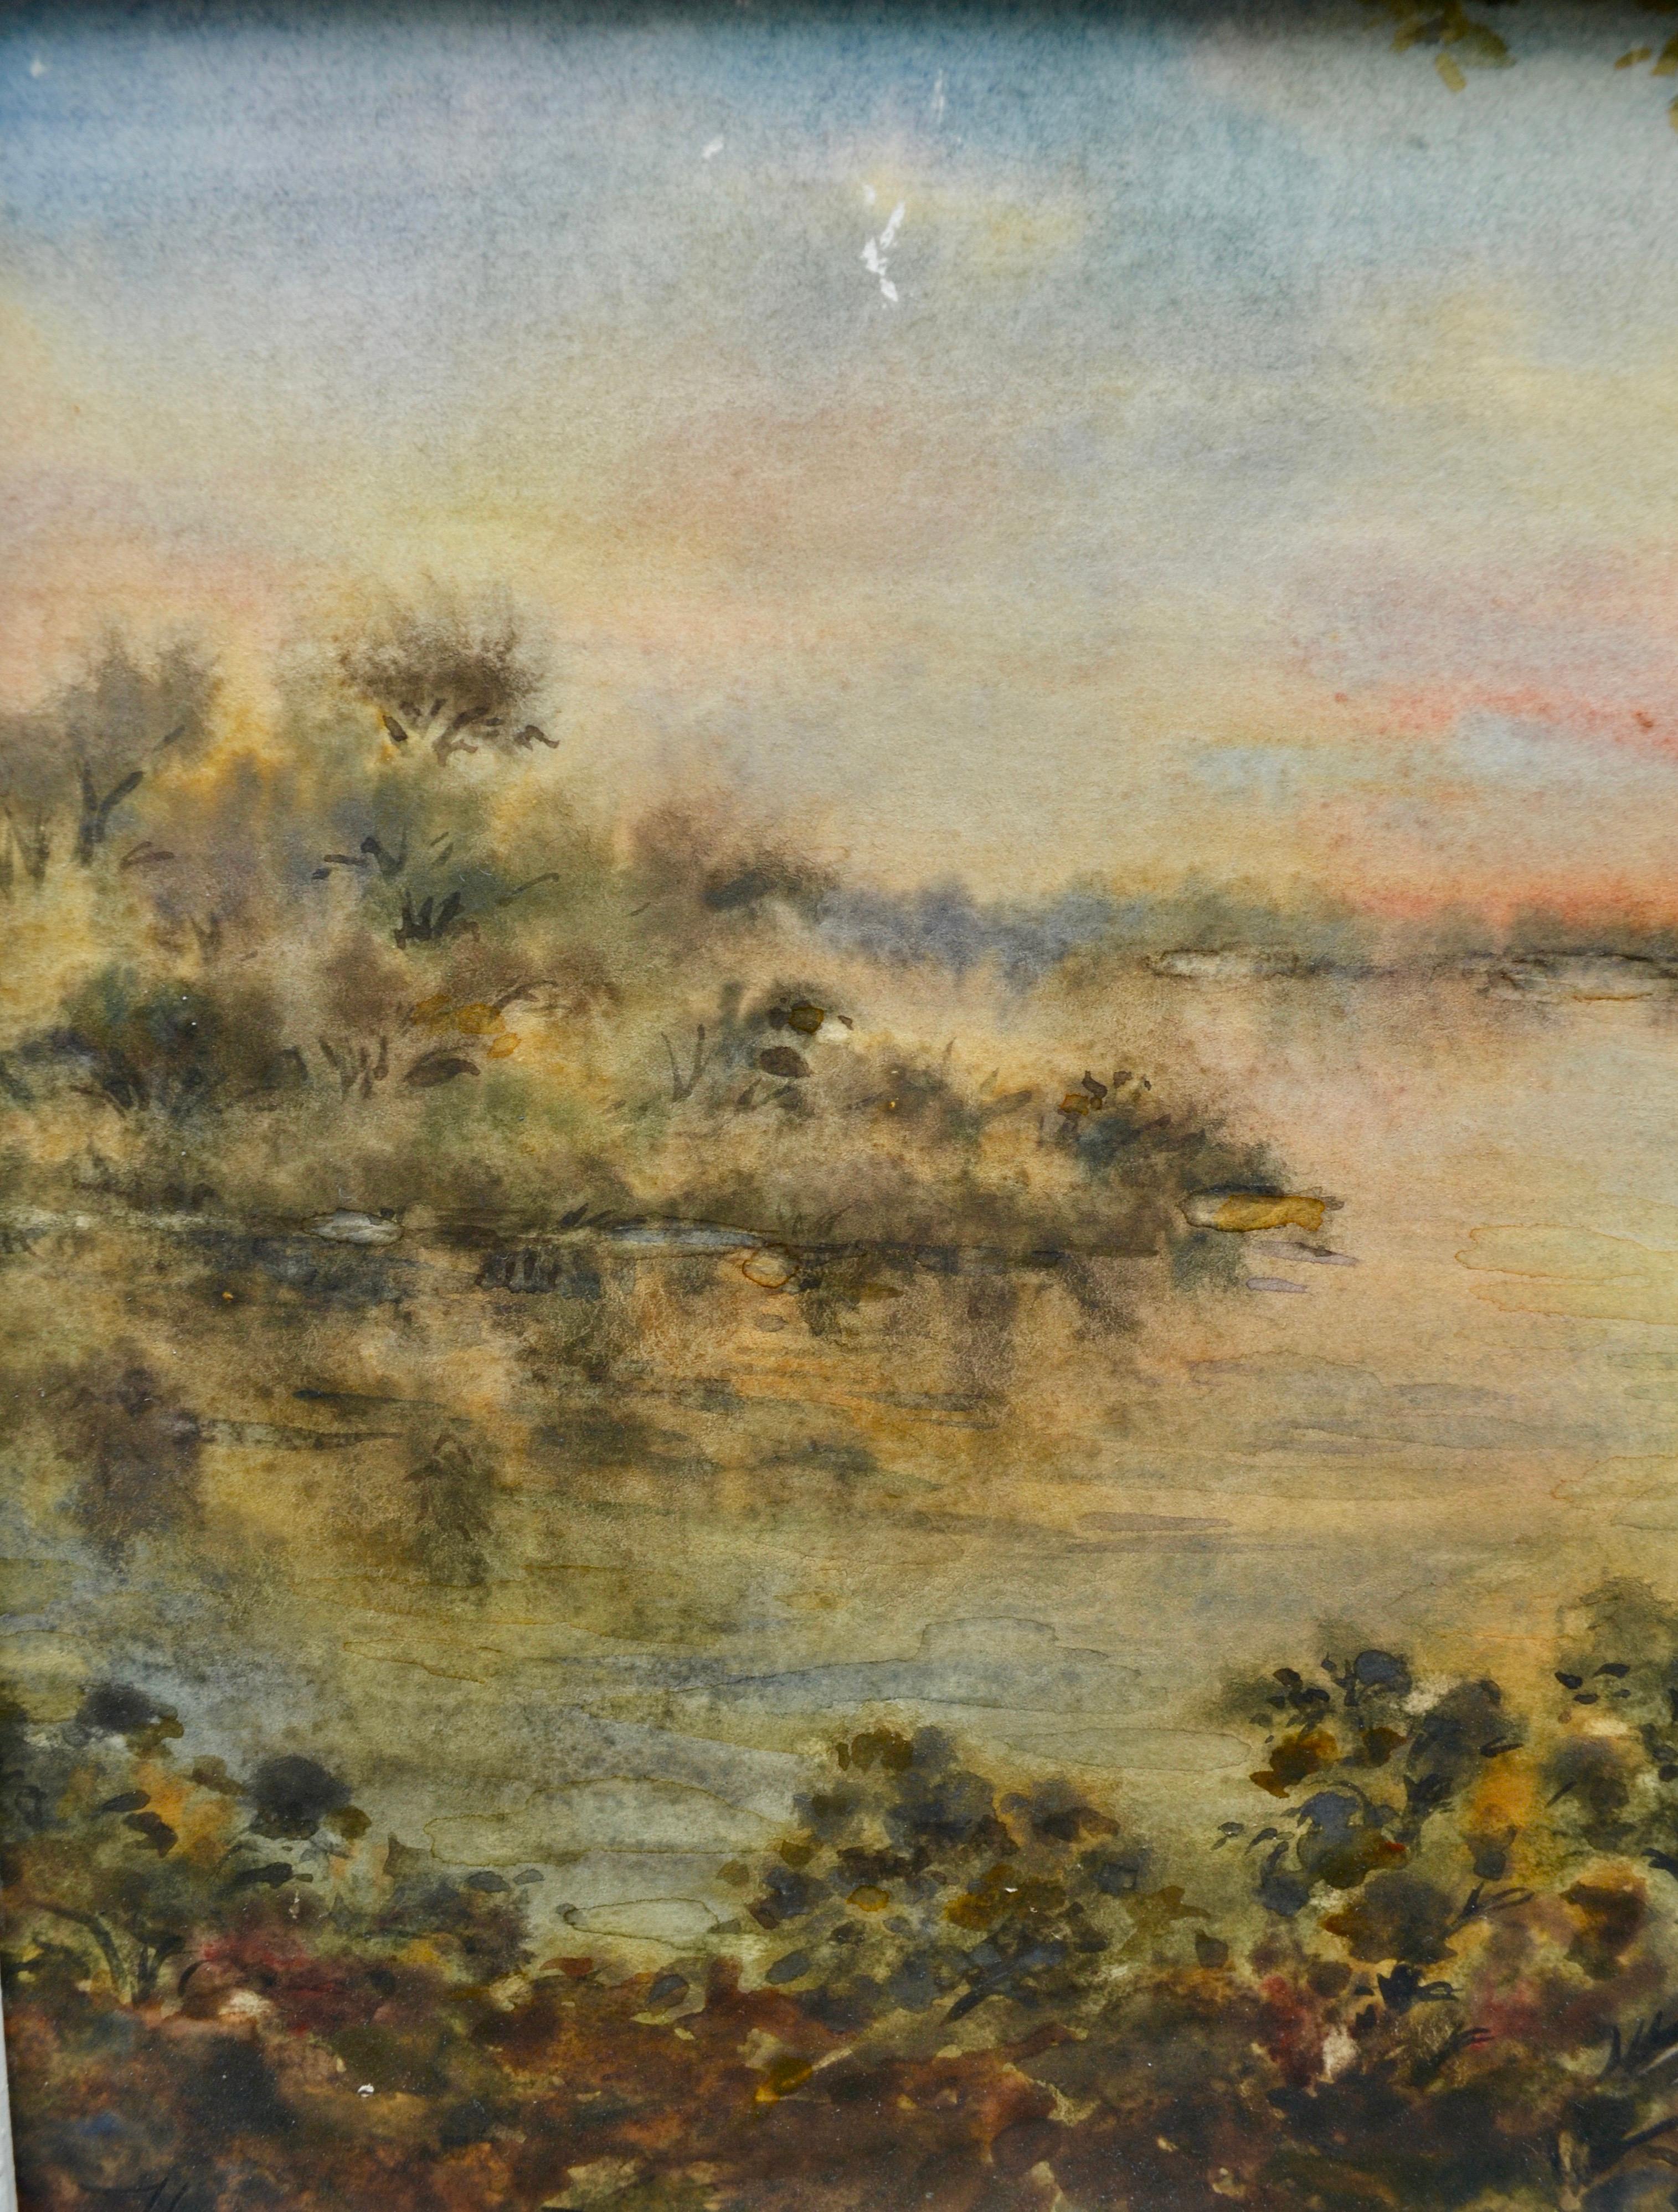 A beautifully executed impressionist watercolor on cardboard titled sunrise at a suburb of Leningrad ( St Petersburg now) signed and dated 1989 by Russian artist Nadezhda Fedorovna Stepanova Senichkina. This information is inscribed in a handwritten